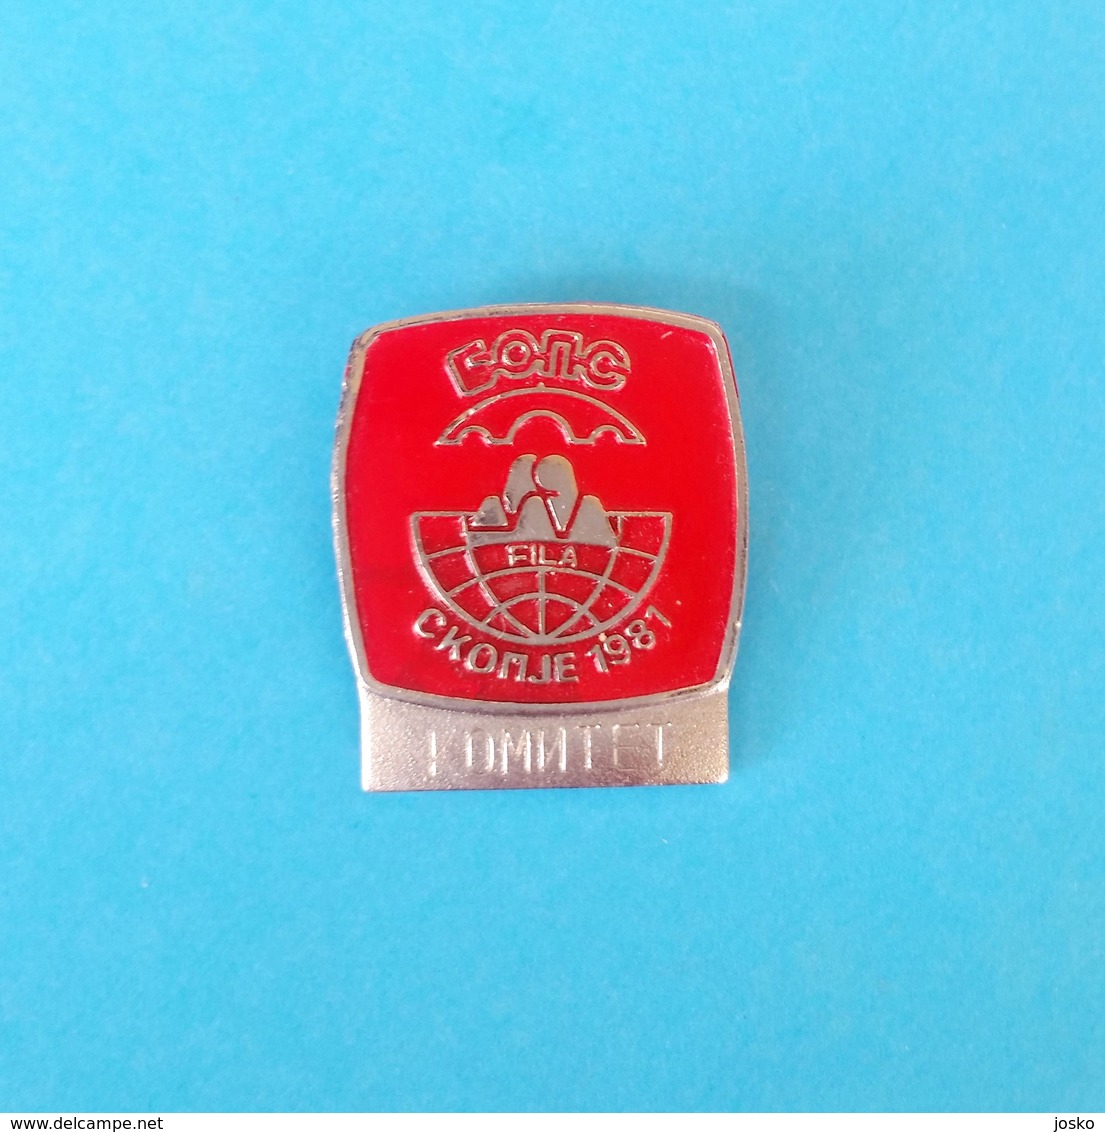 1981 WORLD WRESTLING CHAMPIONSHIPS (FILA) Official Participant Pin Badge "COMMITTEE" .. Lutte Ringen Lotta Lucha Worste - Lutte